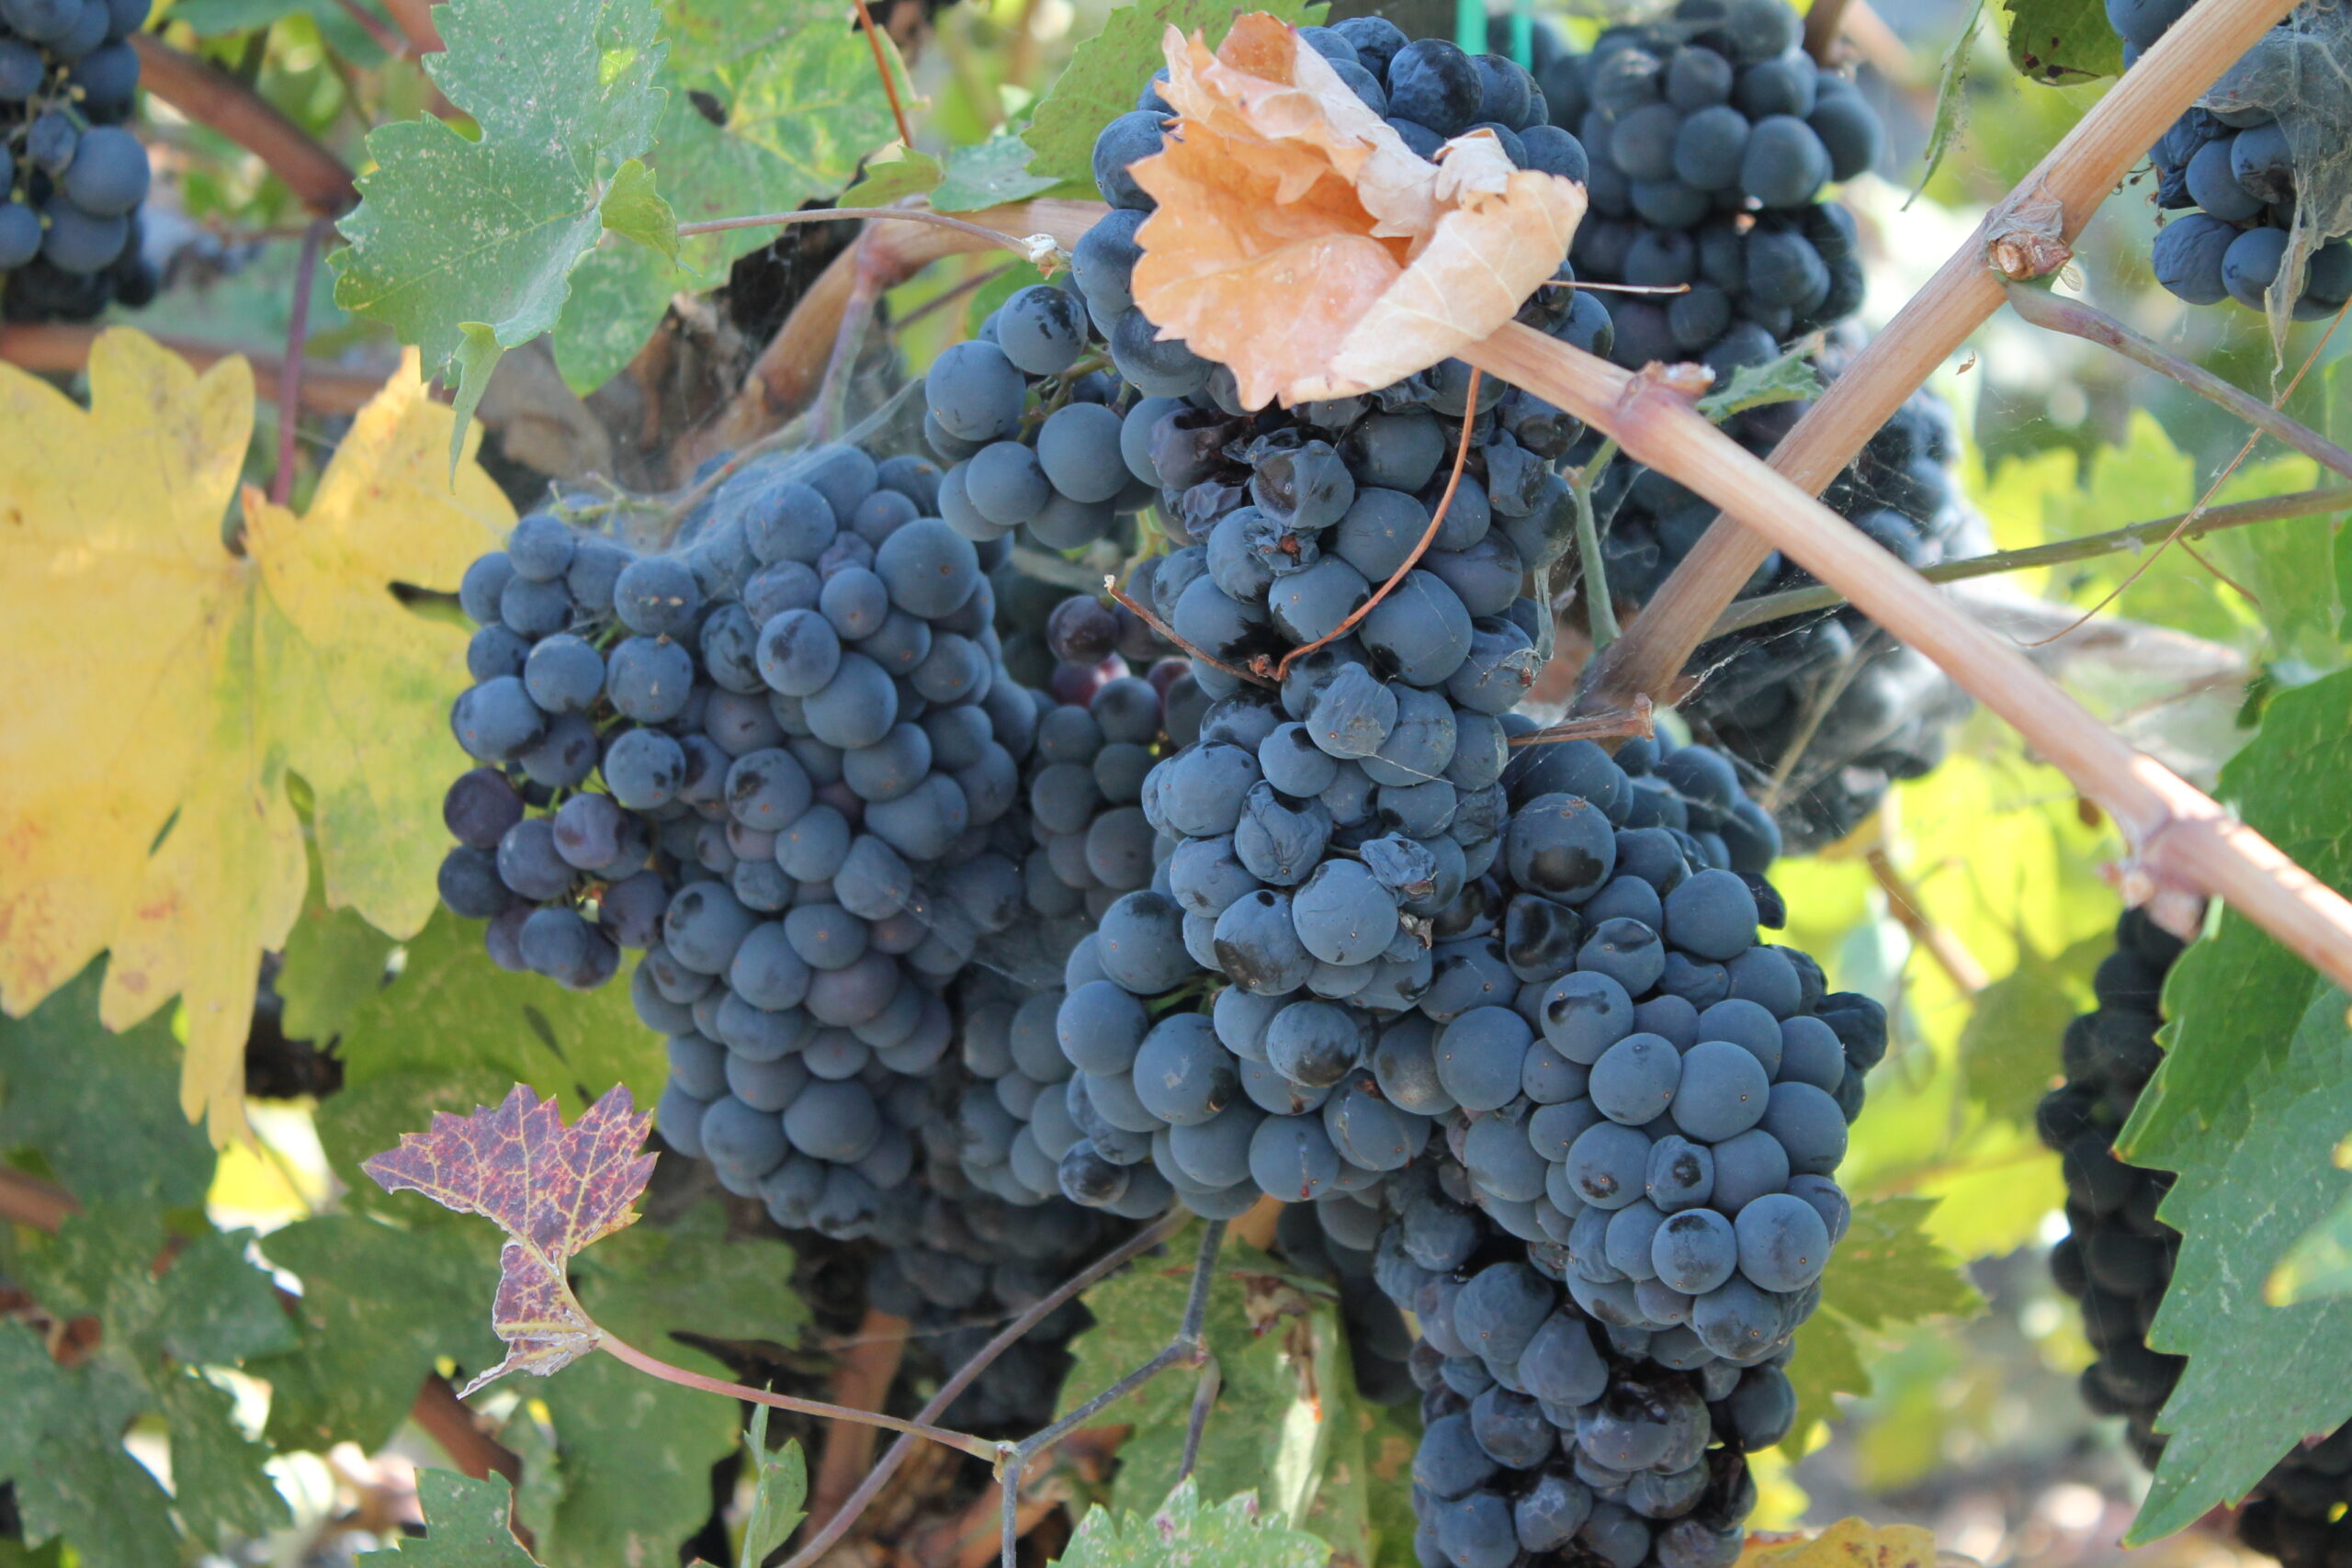 Zinfandel grapes ready to harvest at Charter Oak Winery in St. Helena, California. (Photo: Super G)